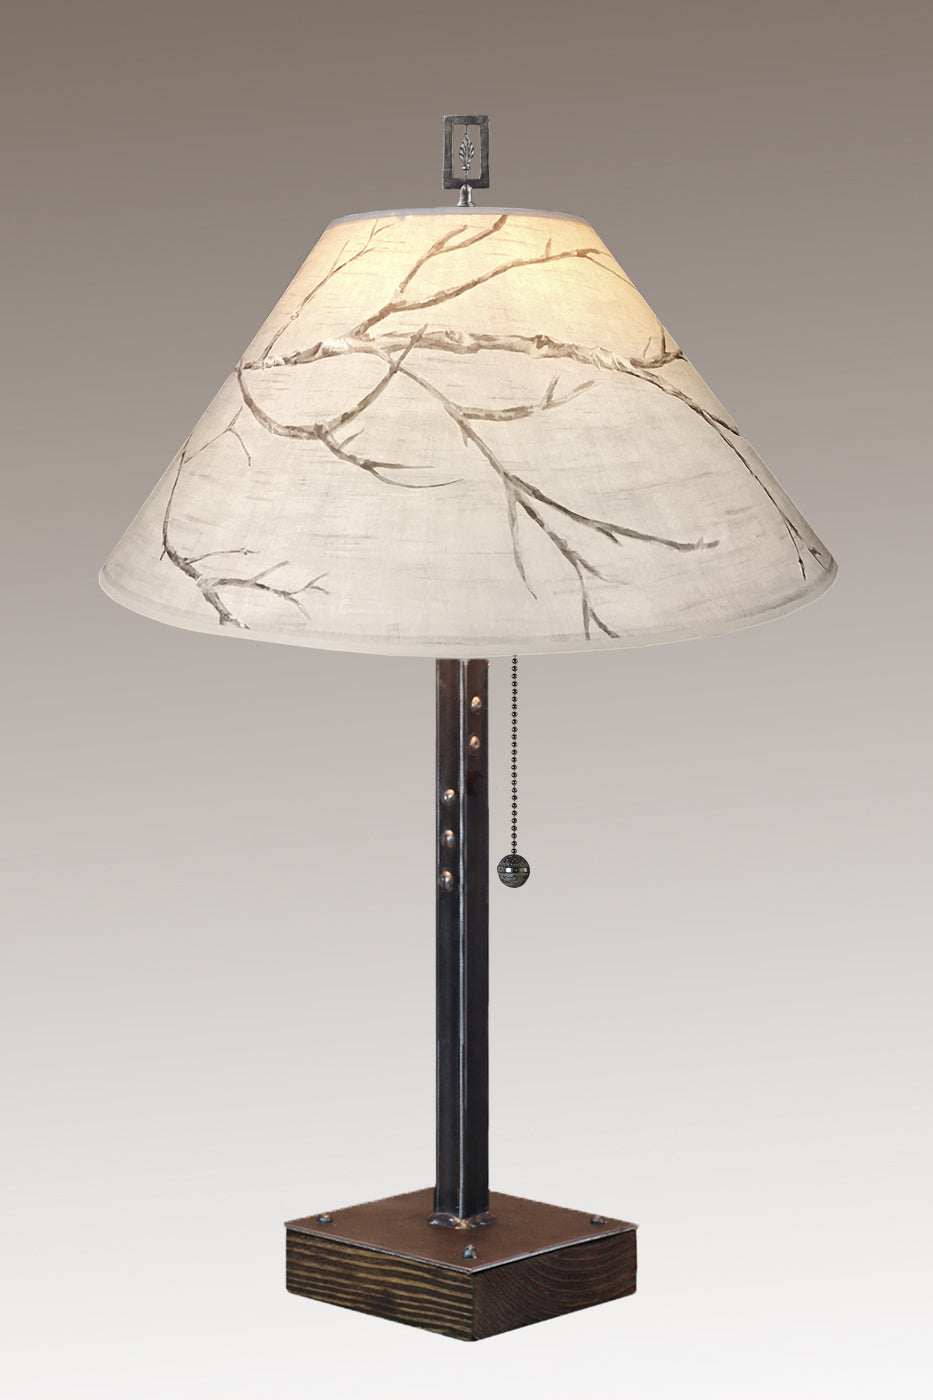 Janna Ugone & Co Table Lamps Steel Table Lamp on Wood with Large Conical Shade in Sweeping Branch